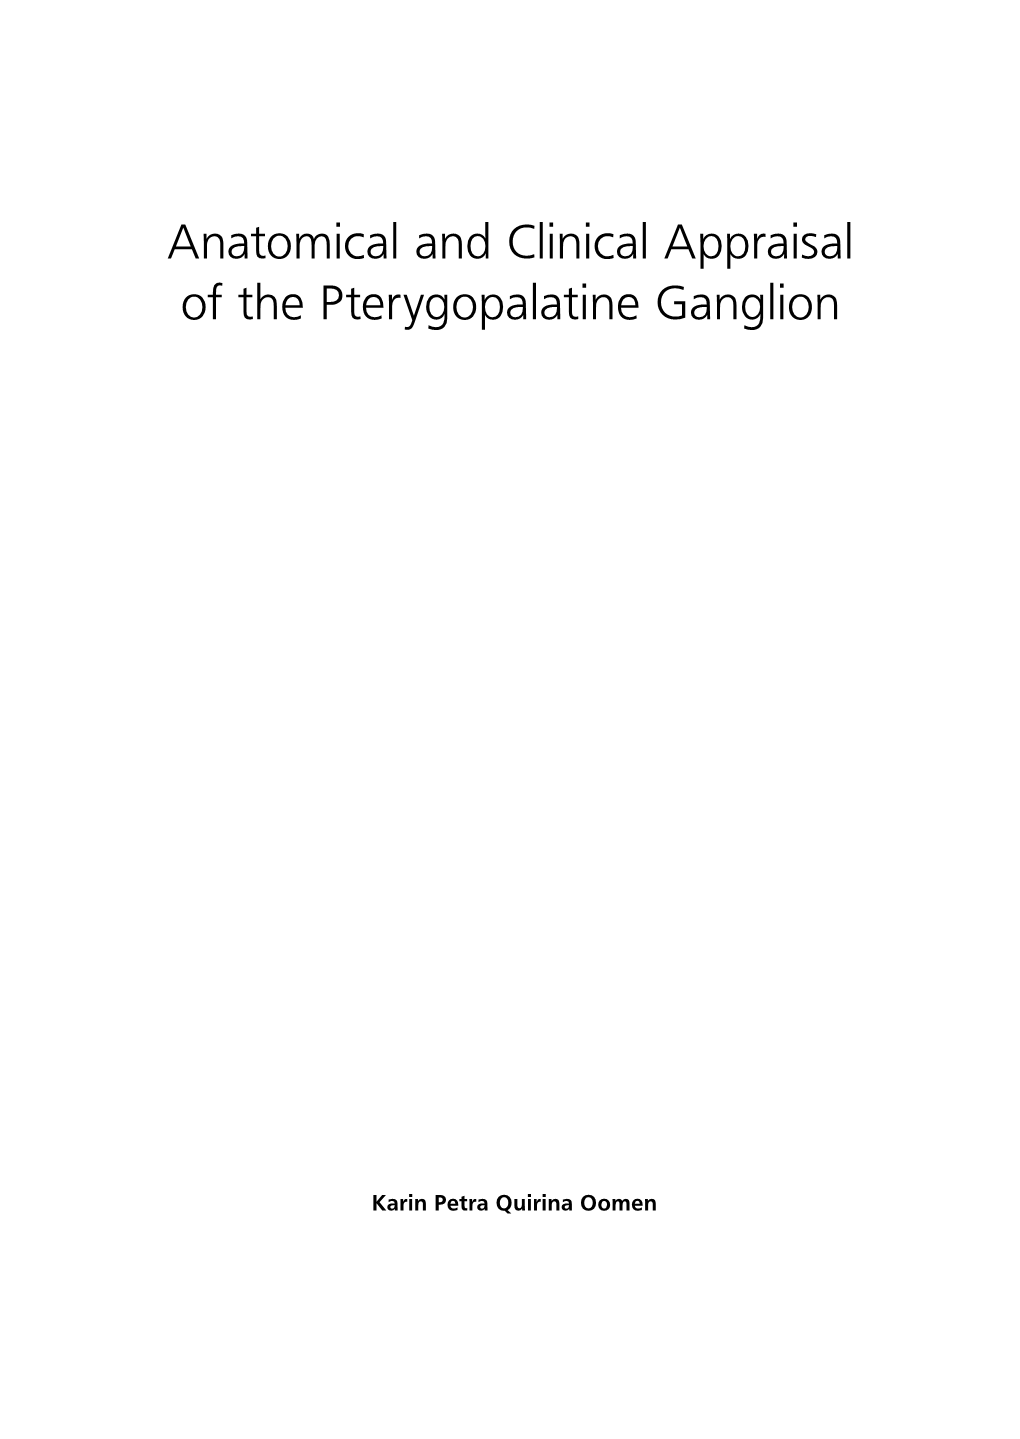 Anatomical and Clinical Appraisal of the Pterygopalatine Ganglion